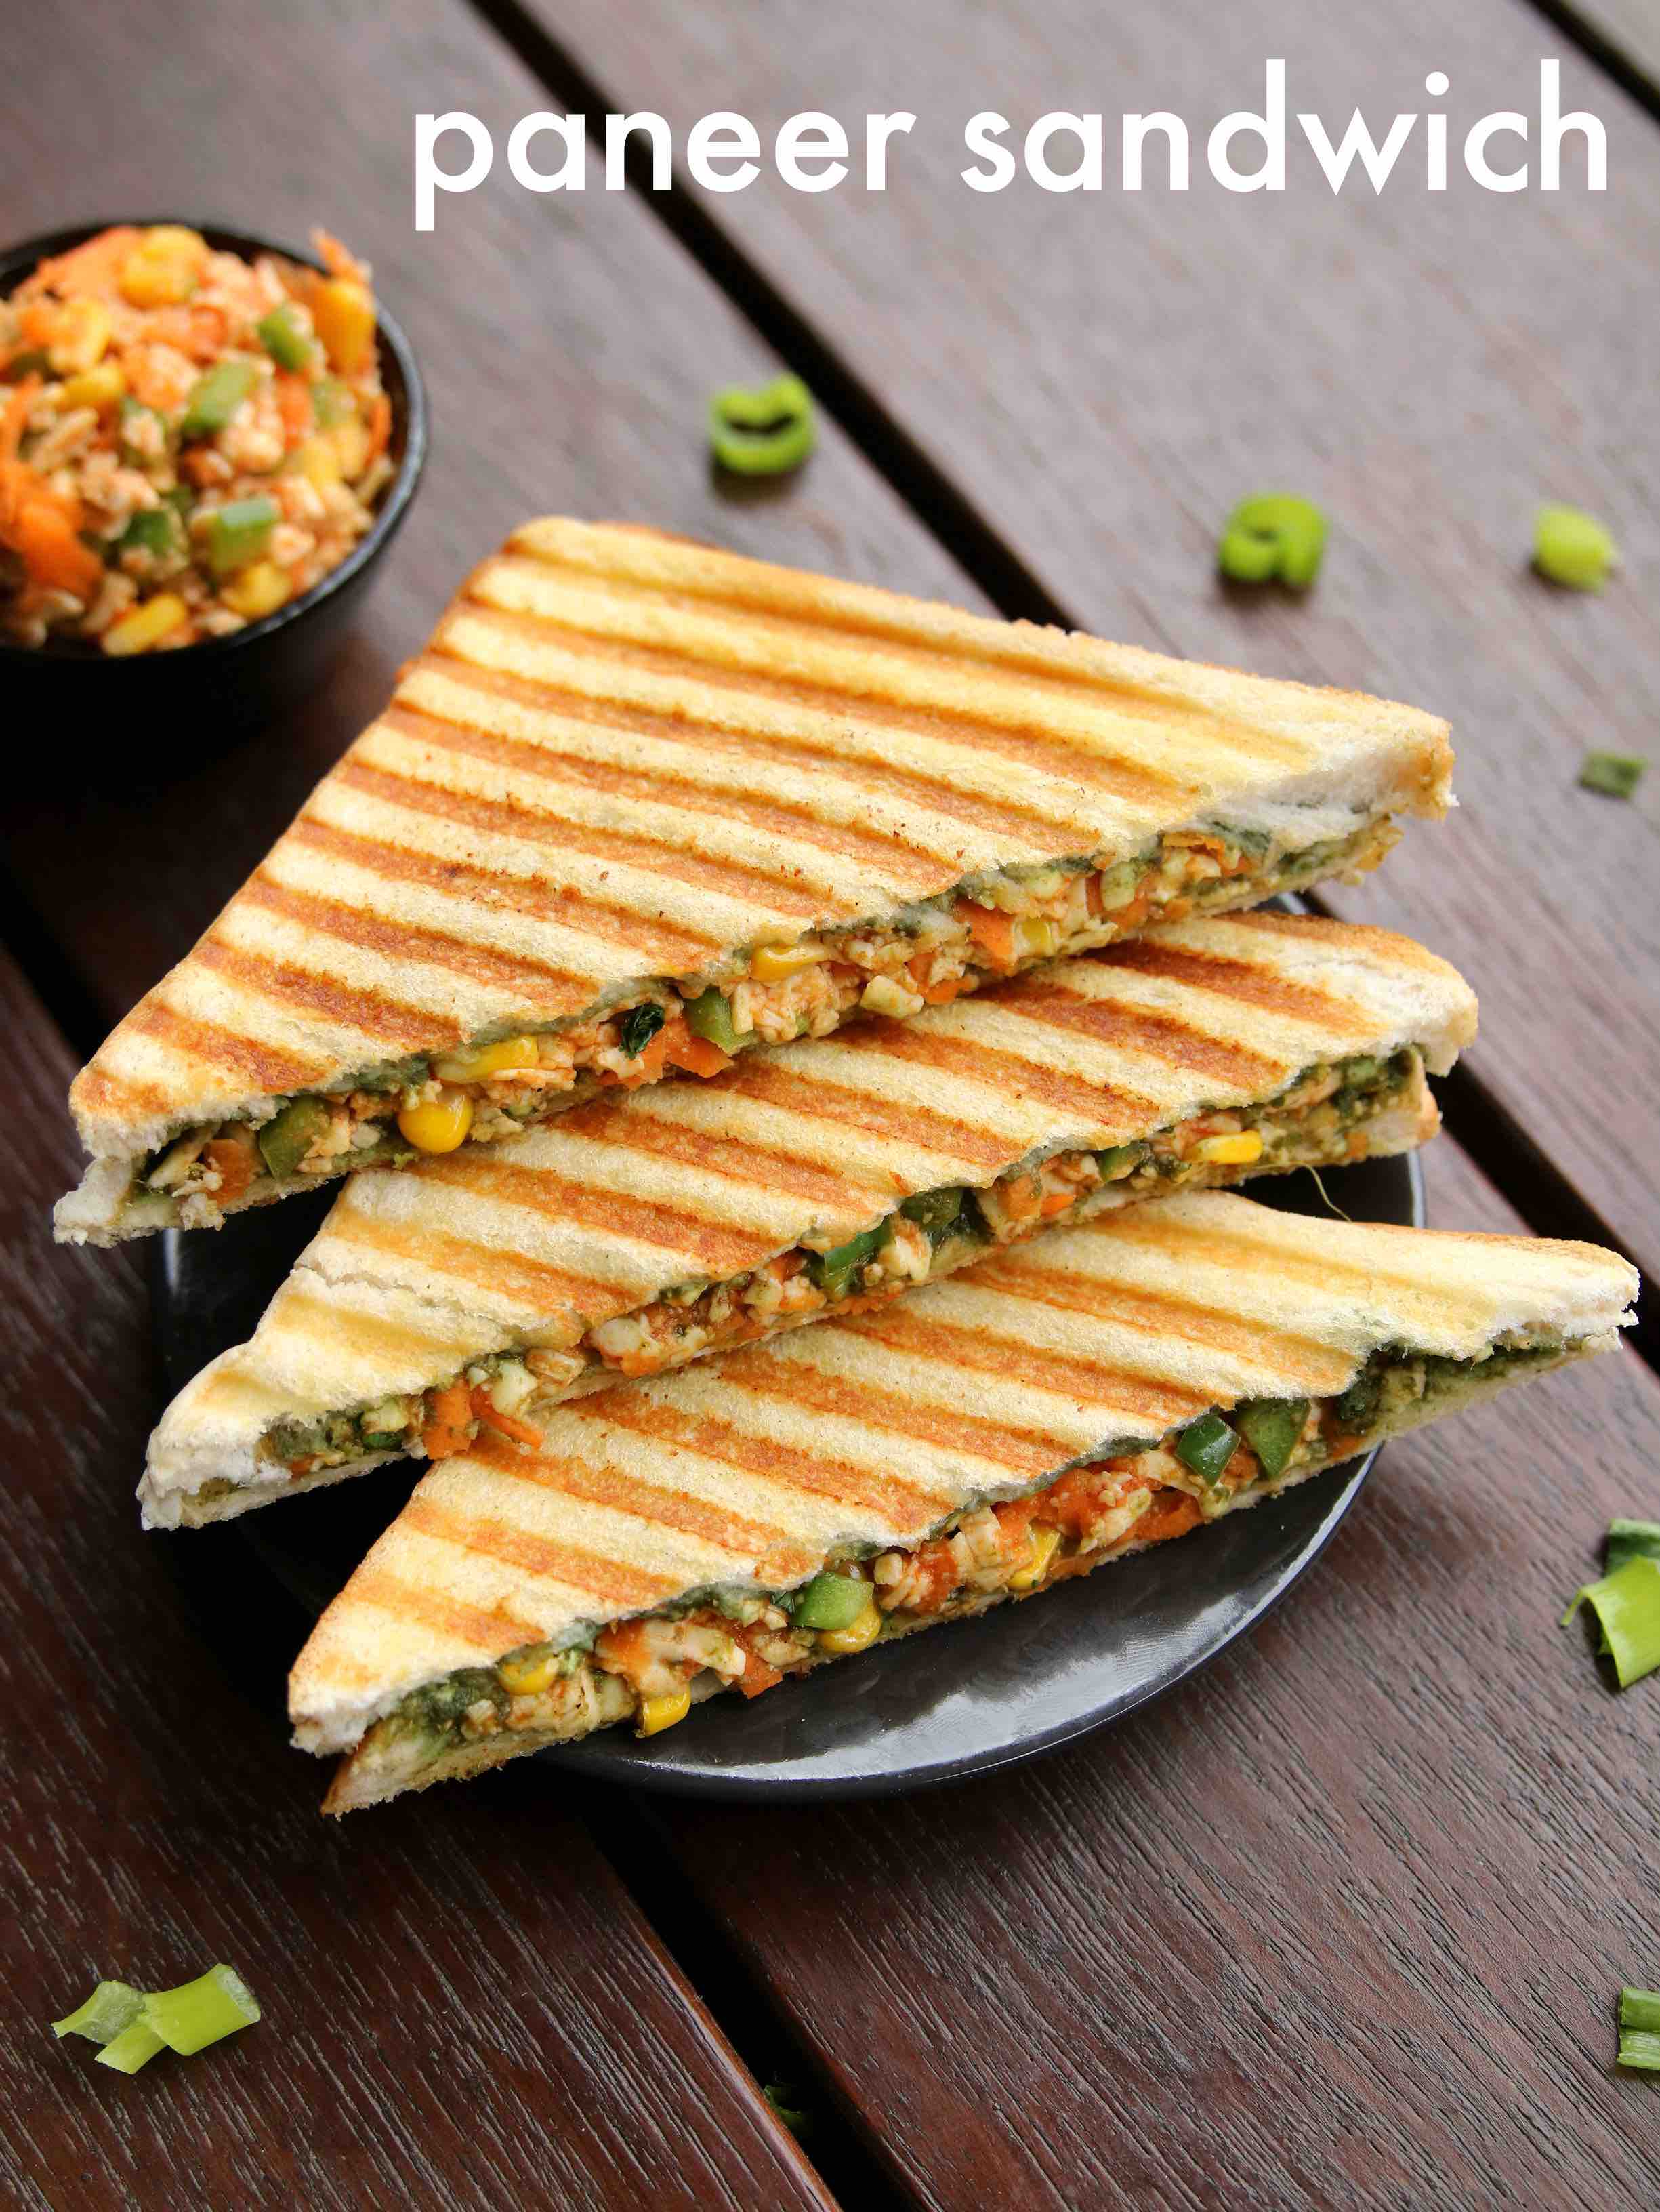 Paneer Sandwich Recipe How To Make Grilled Paneer Sandwich Recipe